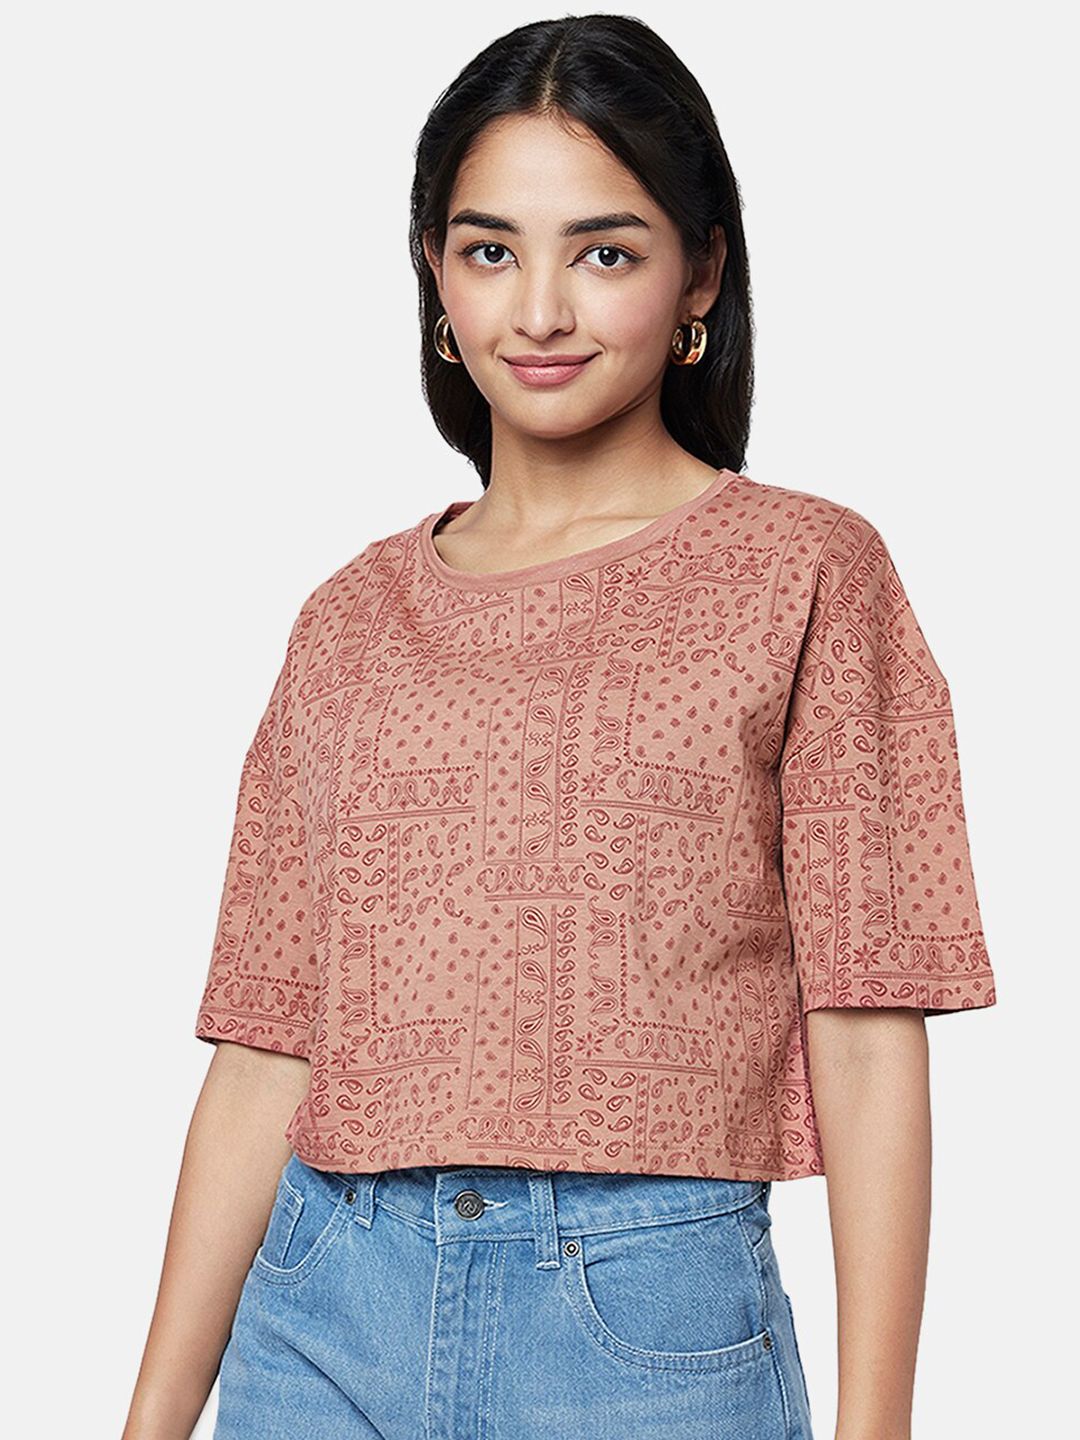 YU by Pantaloons Printed Round Neck Cotton Crop Top Price in India